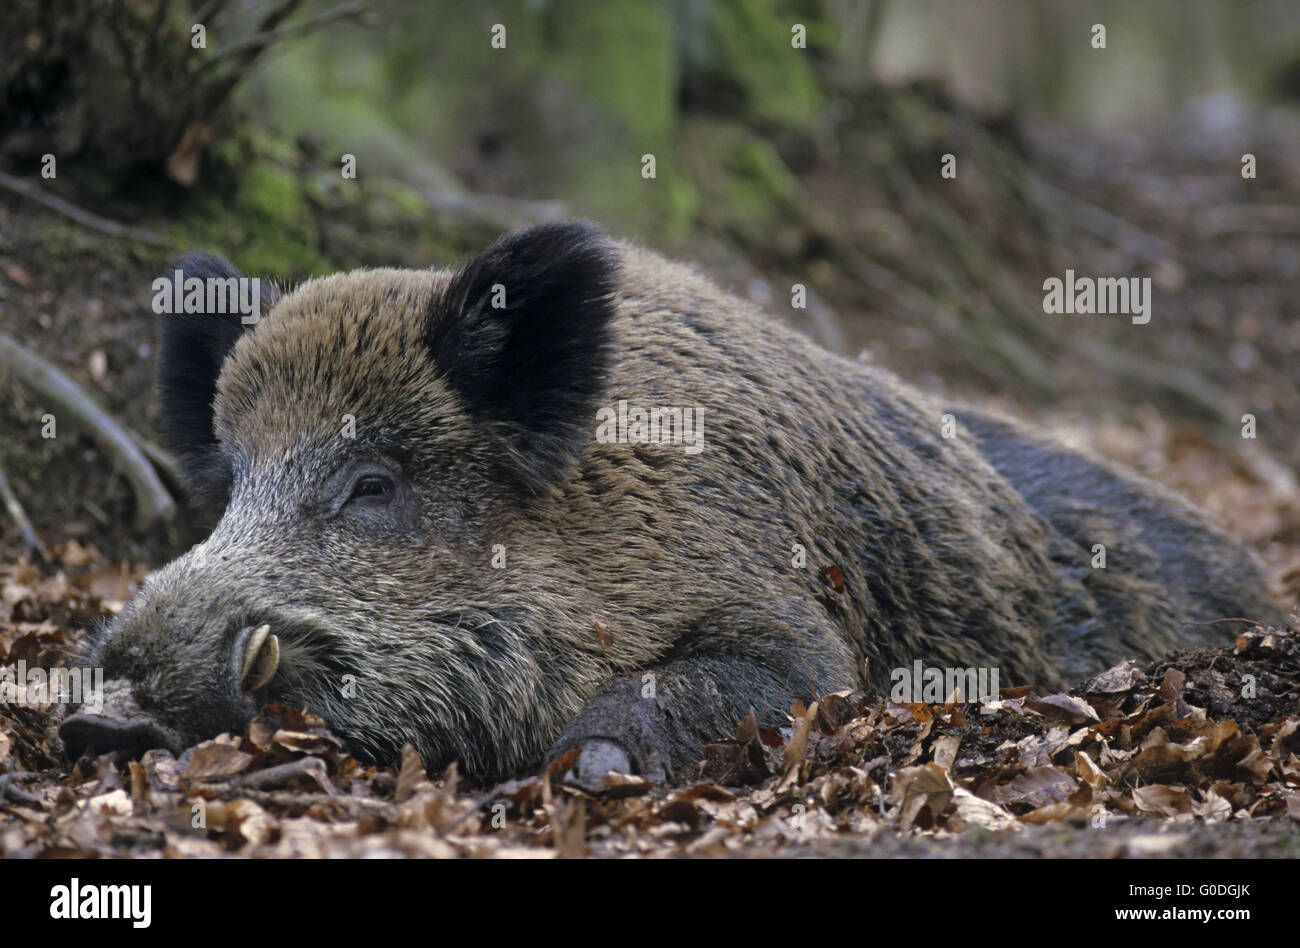 Boar Hog Rests On The Forest Floor Stock Photo 103560651 Alamy